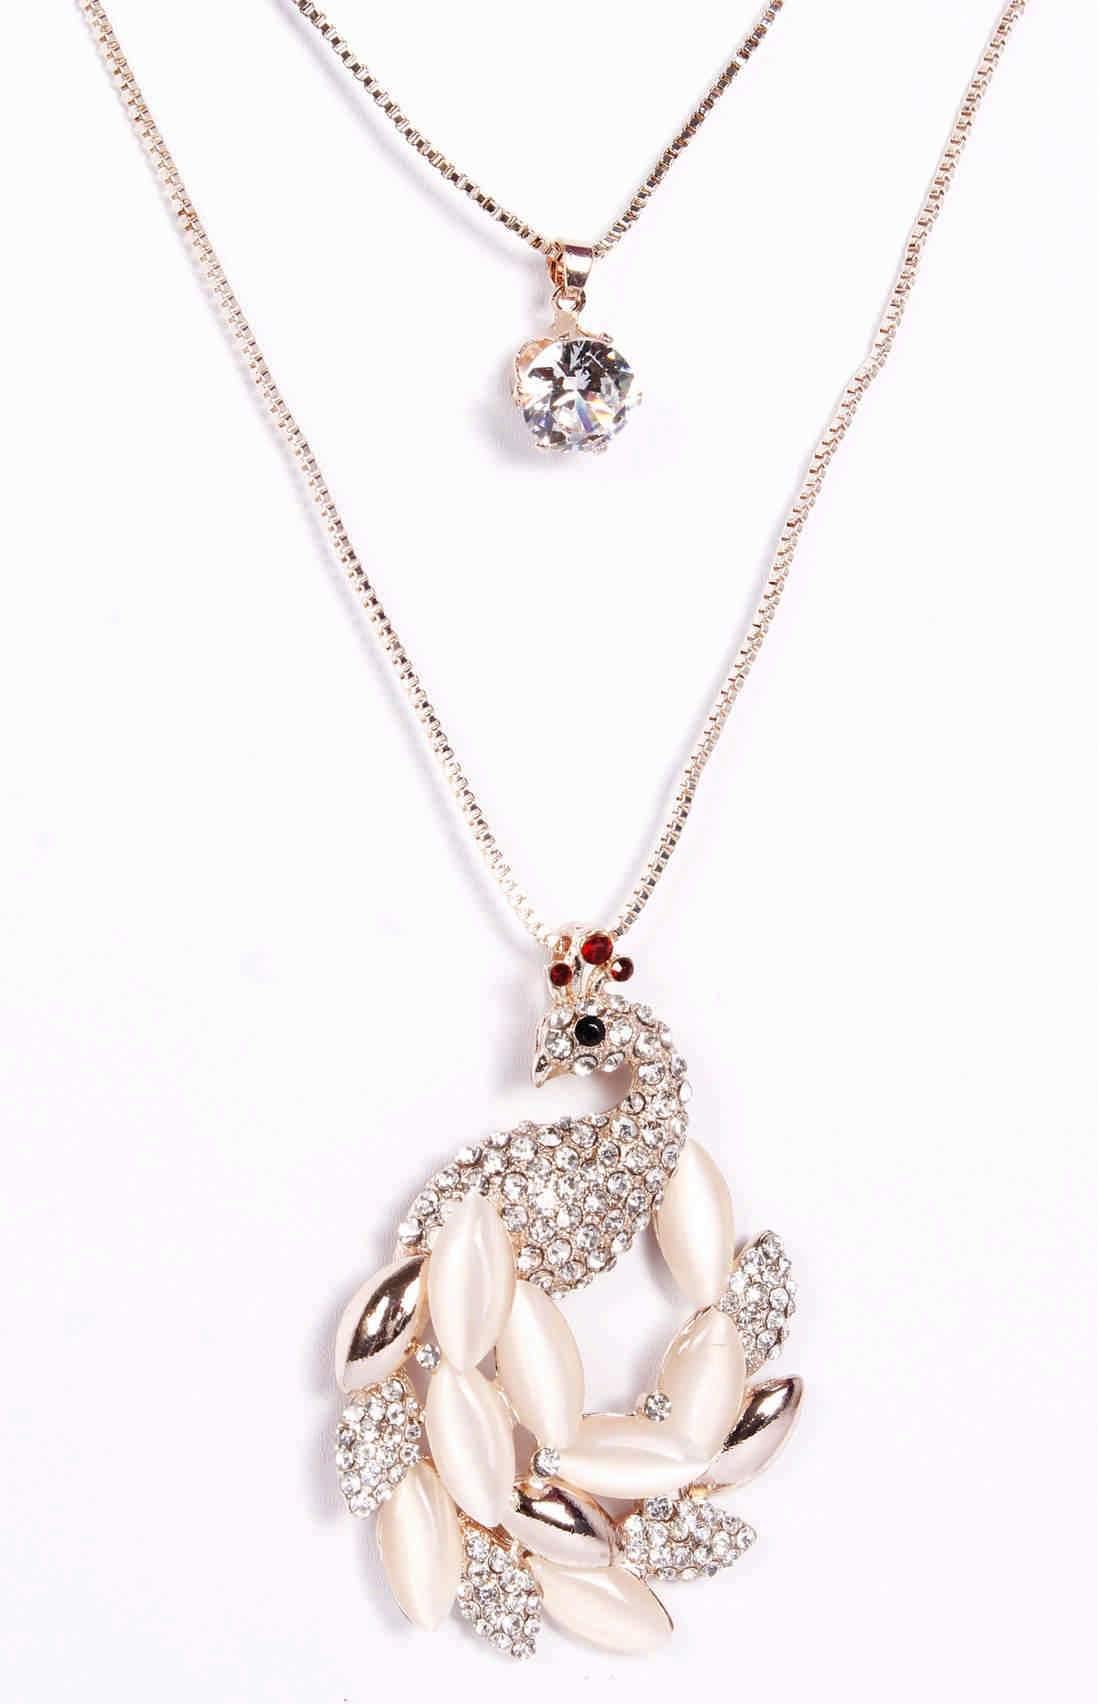 Indian Petals Rhinestones Studded Peacock Design Imitation Fashion Metal Double Pendant with Long Chain for Girls - Indian Petals